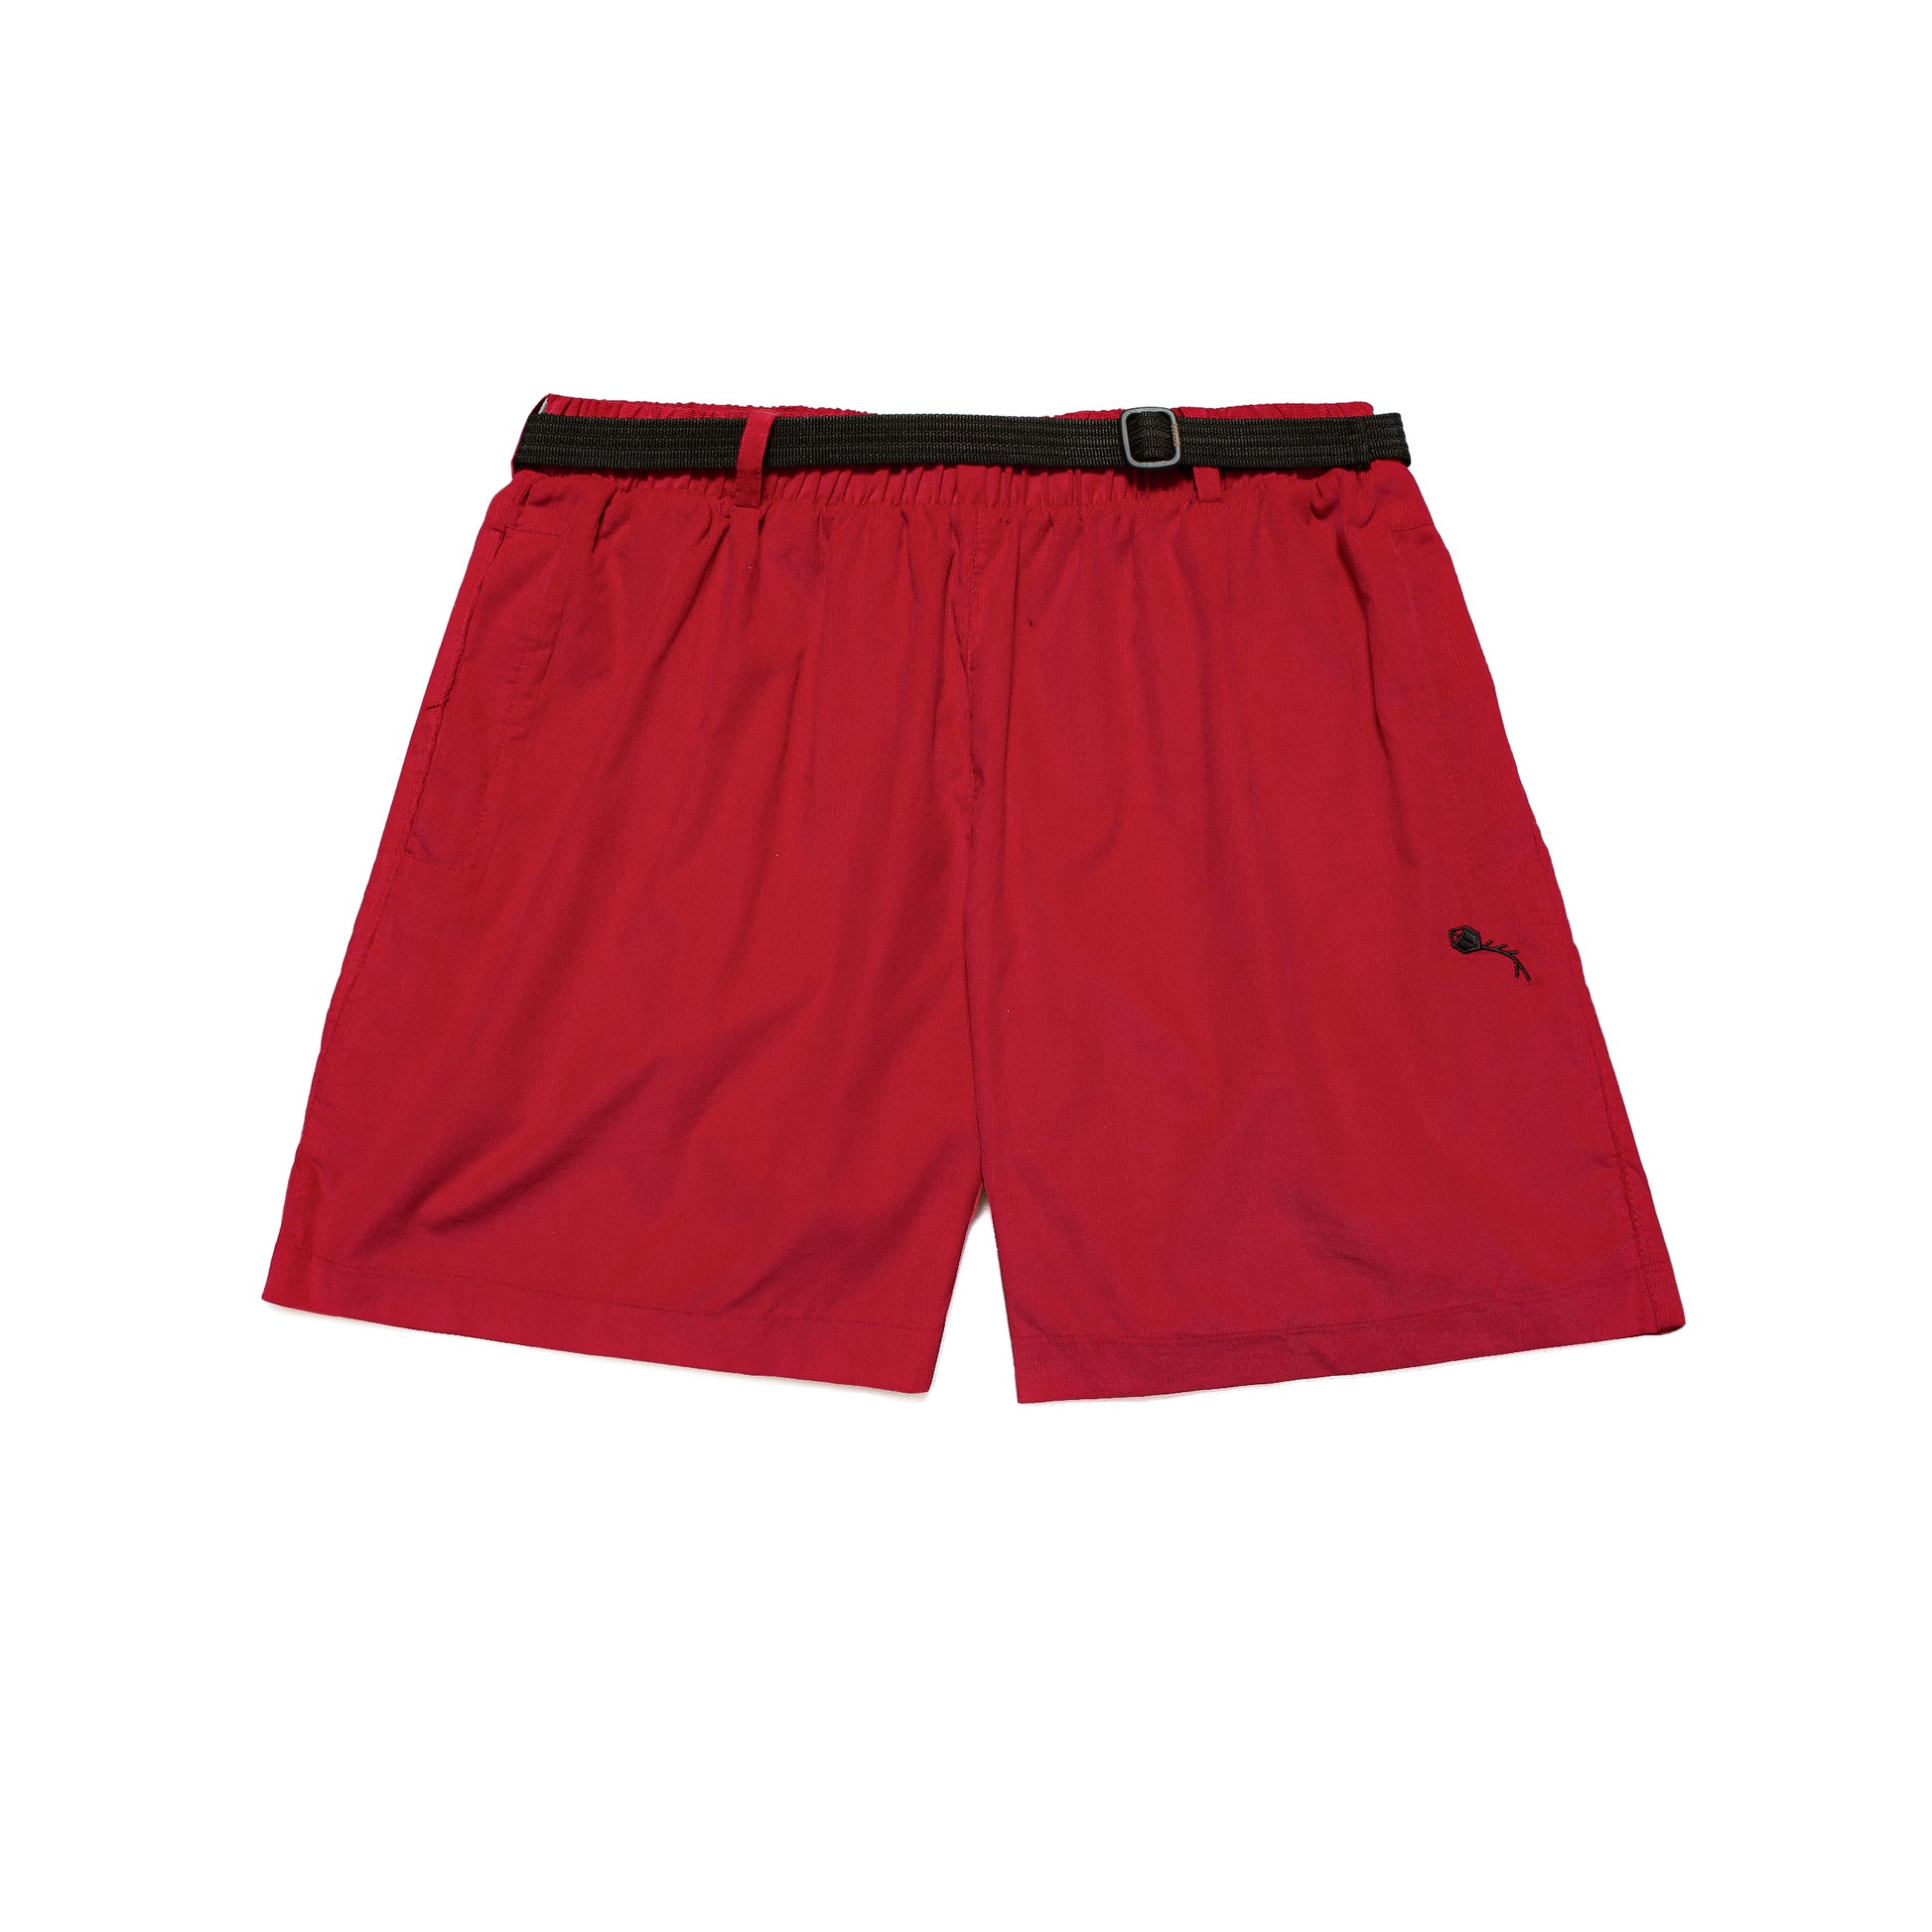 CLASS - Shorts Pipa Corduroy "Red" - THE GAME